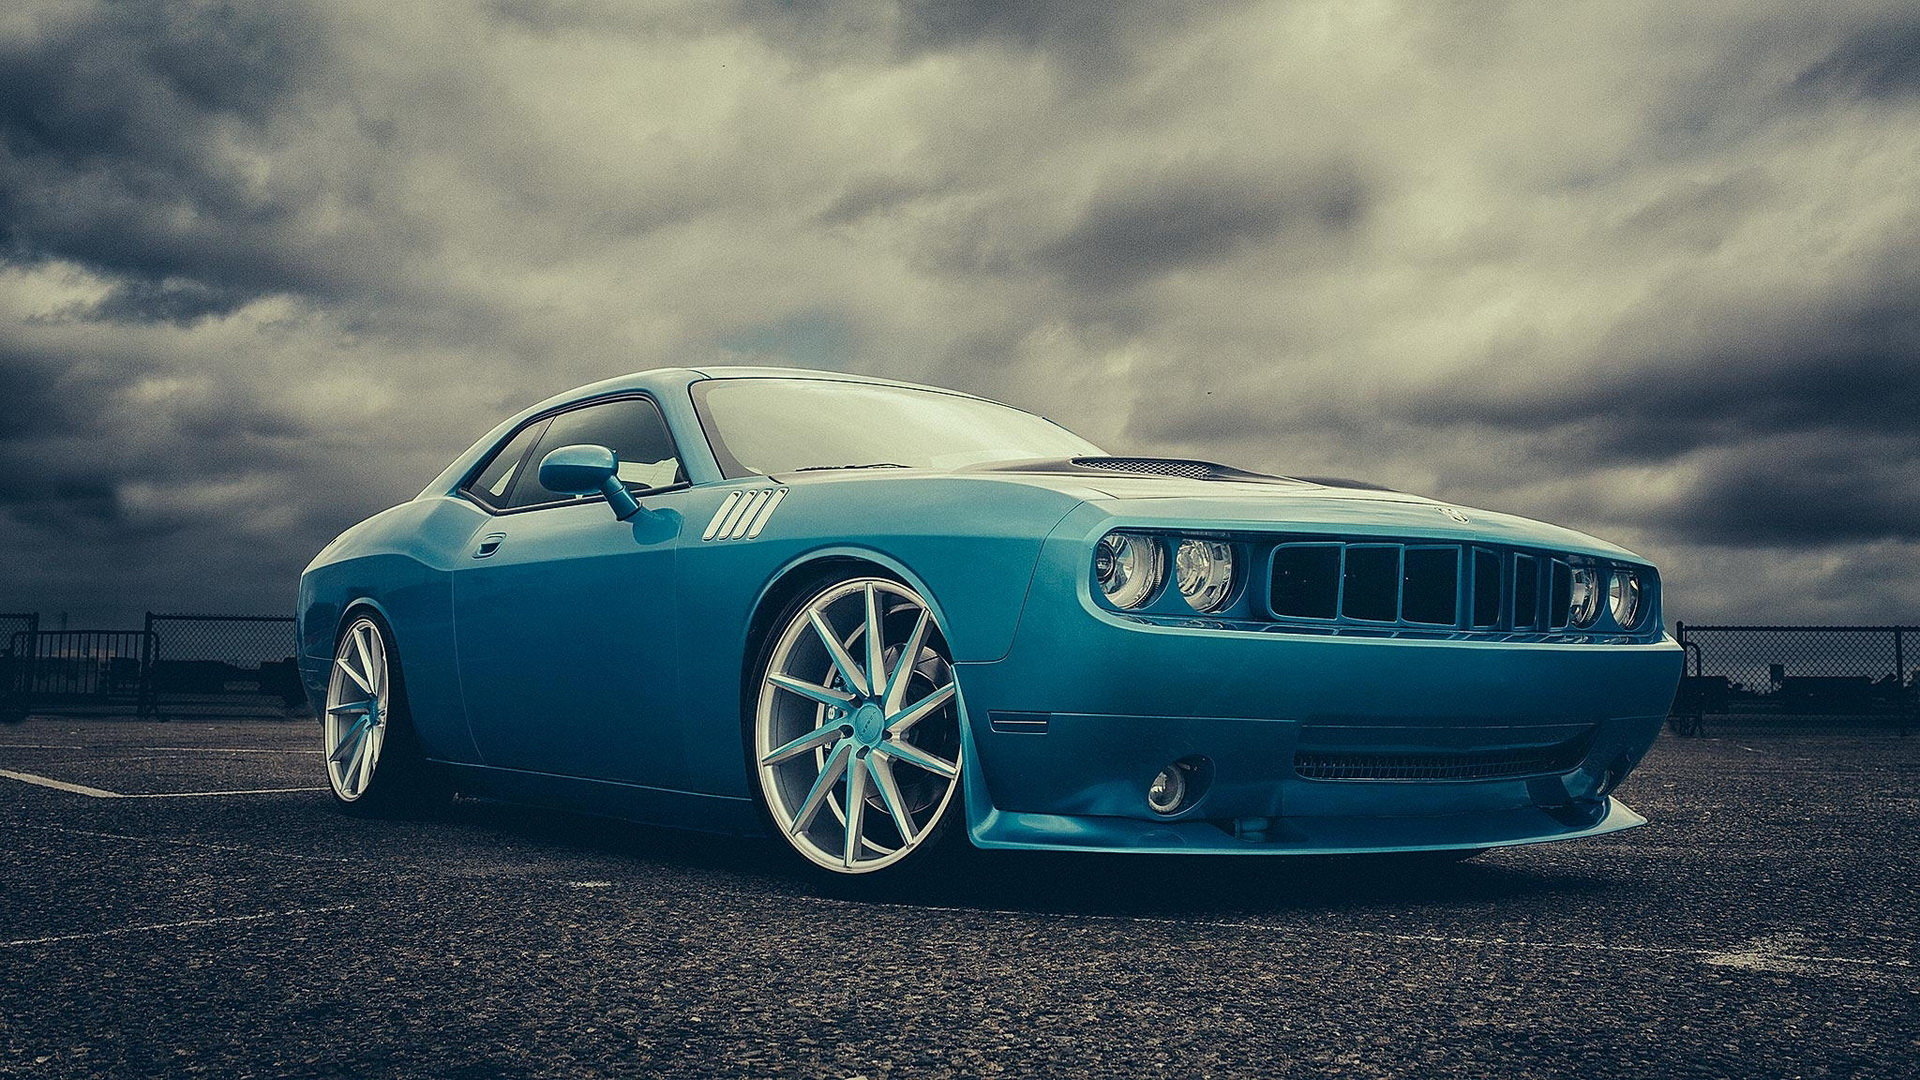 Awesome Dodge Challenger free wallpaper ID:231705 for hd 1920x1080 desktop